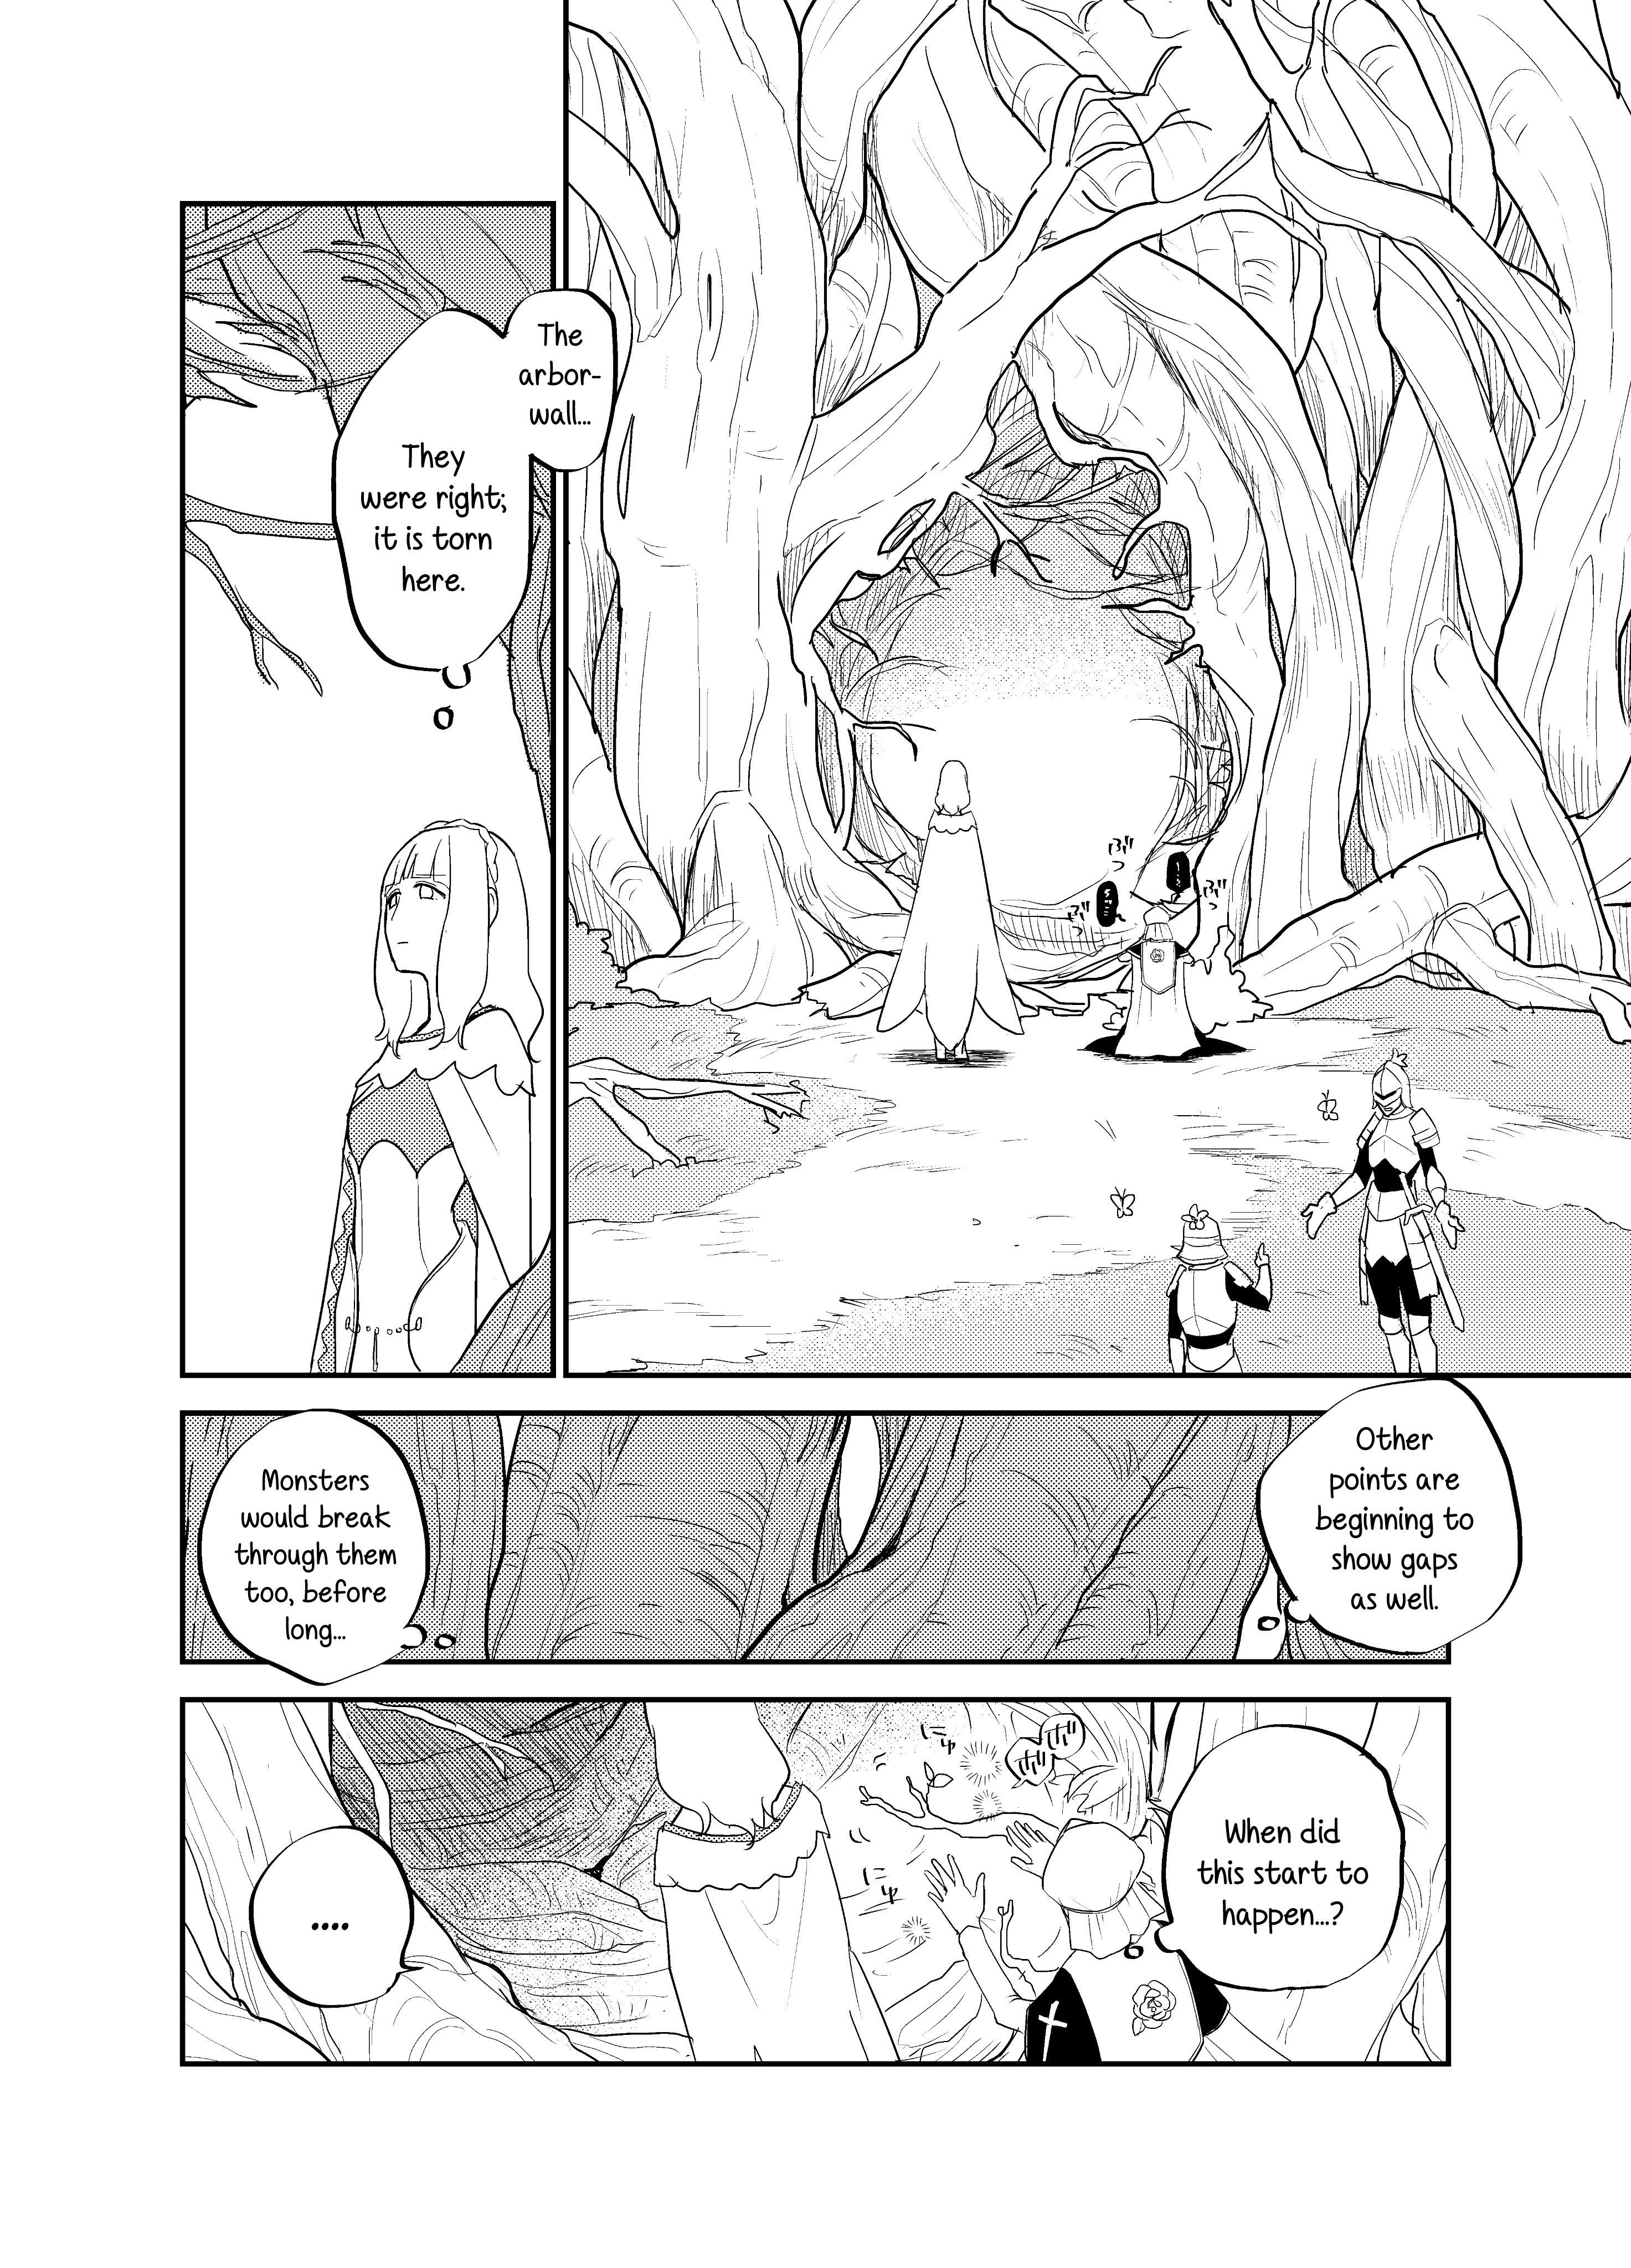 The Princess Of Sylph (Twitter Version) - Page 1